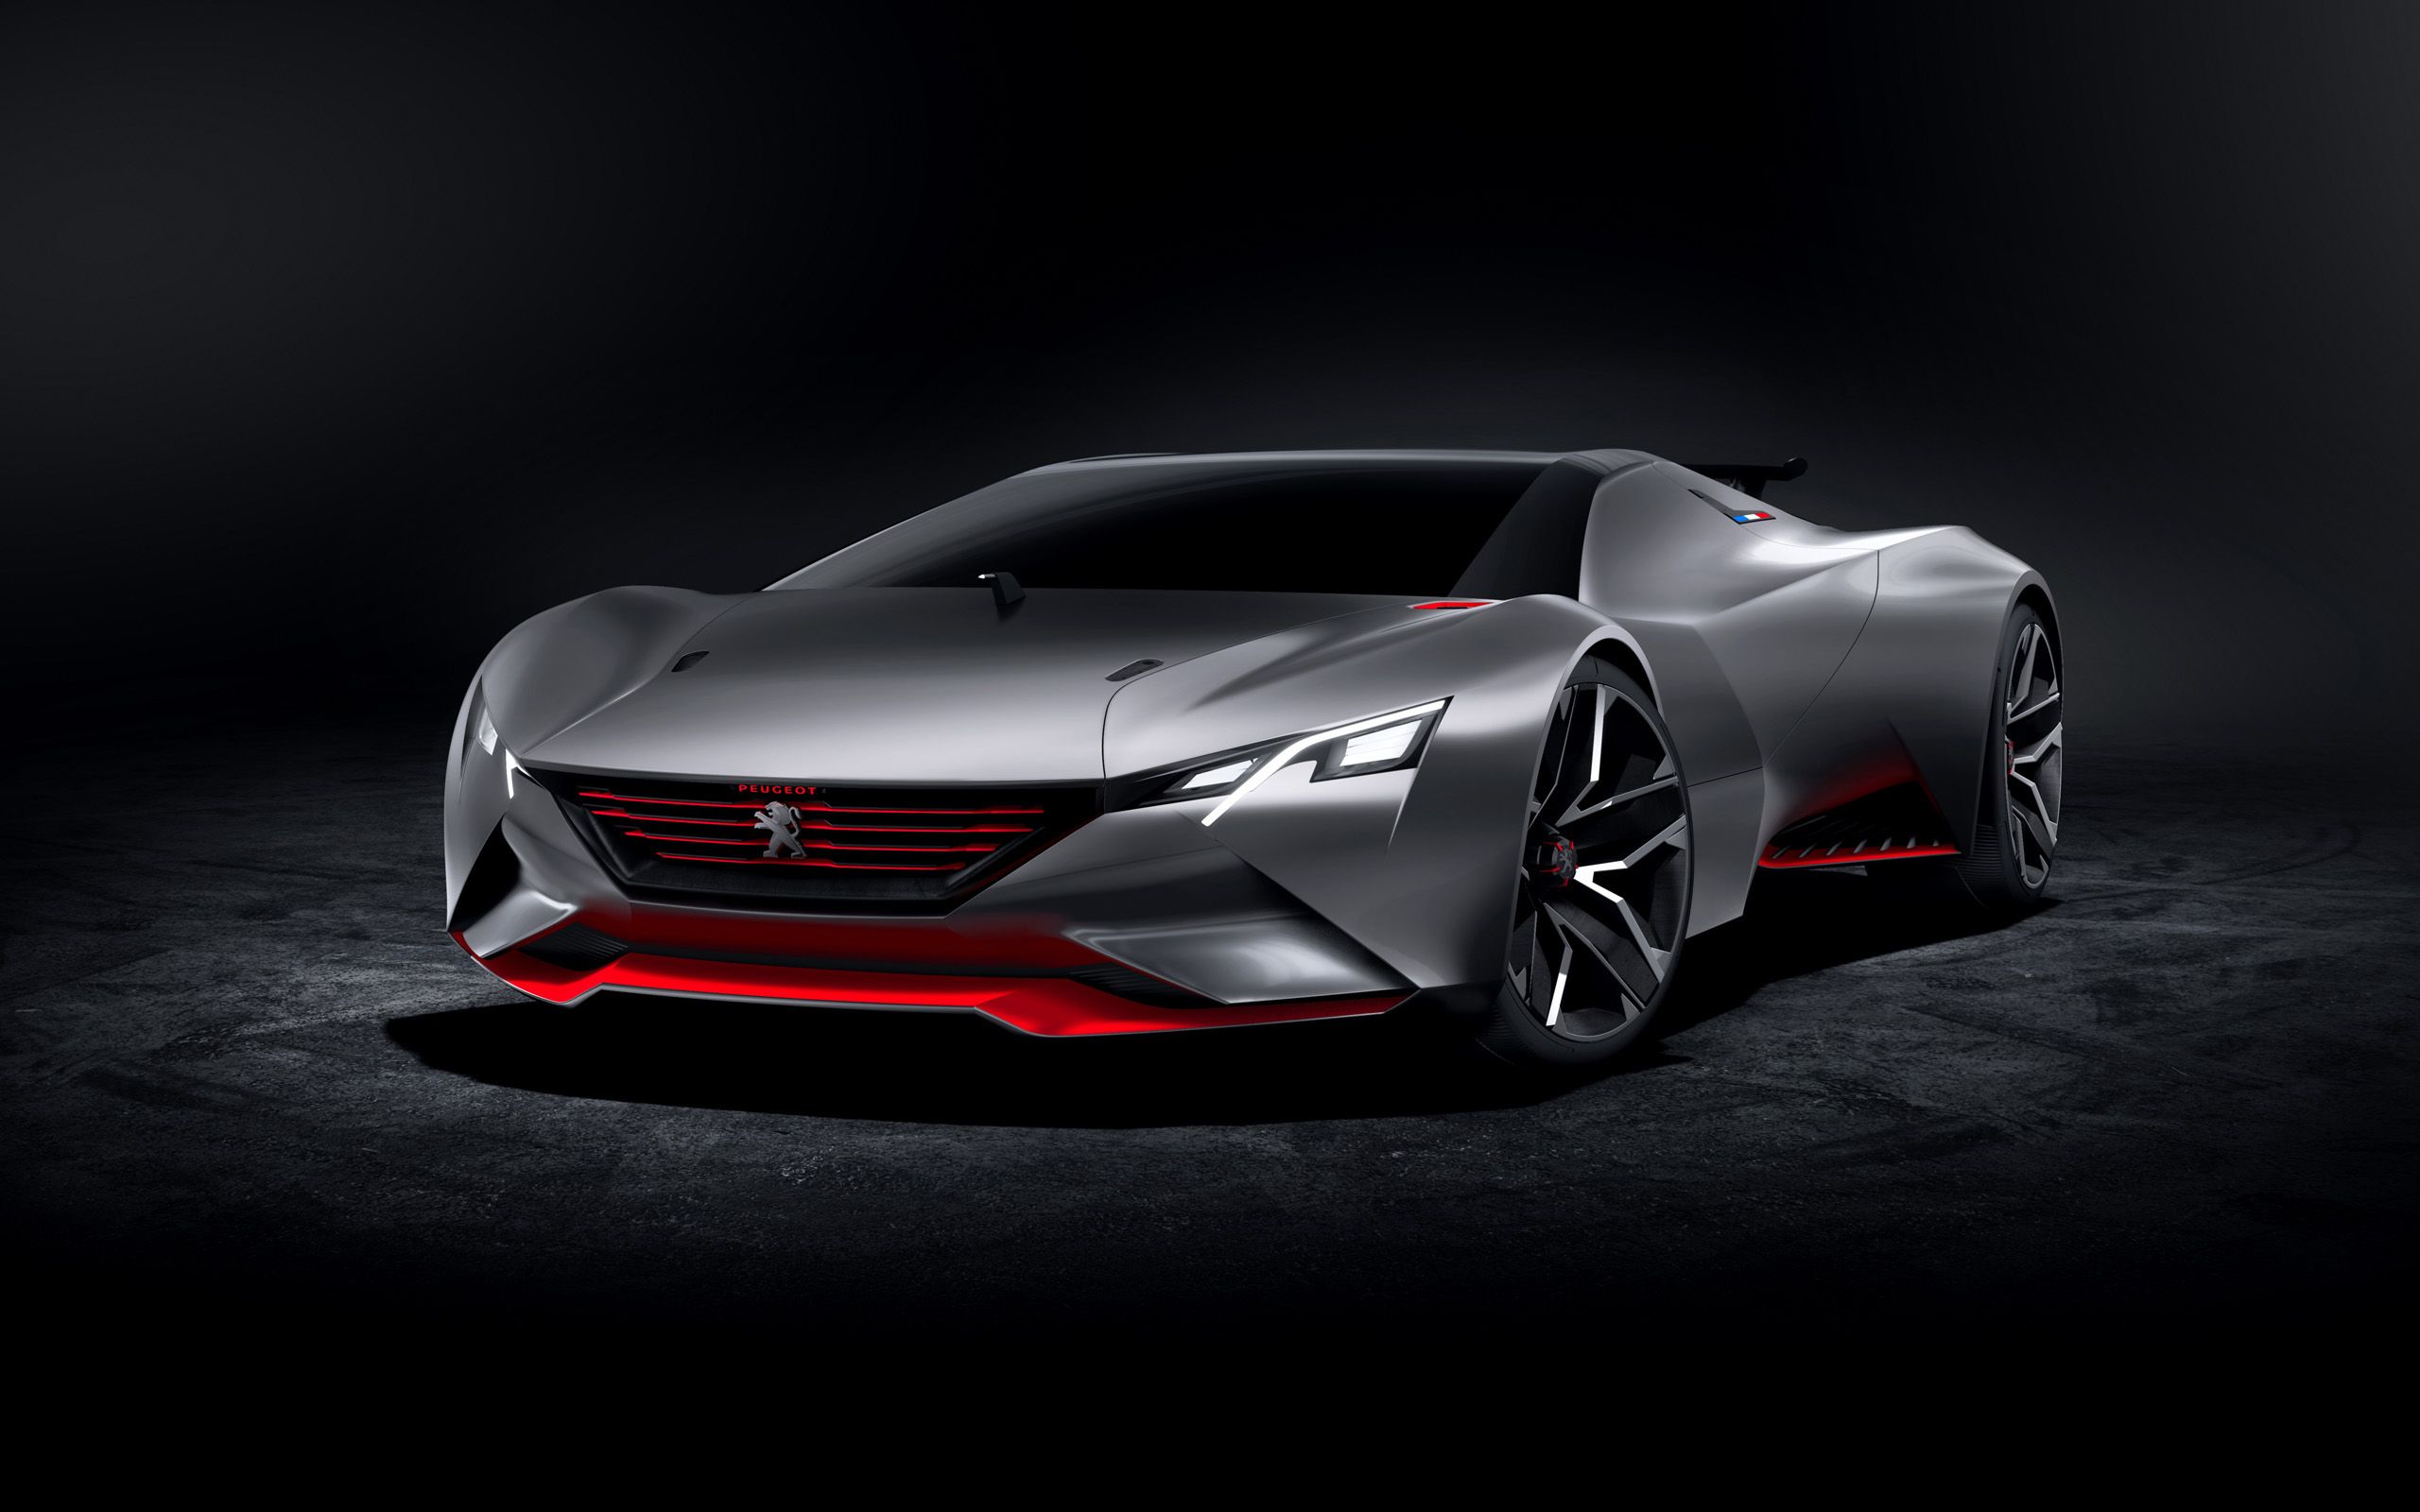 Peugeot Rc Wallpapers